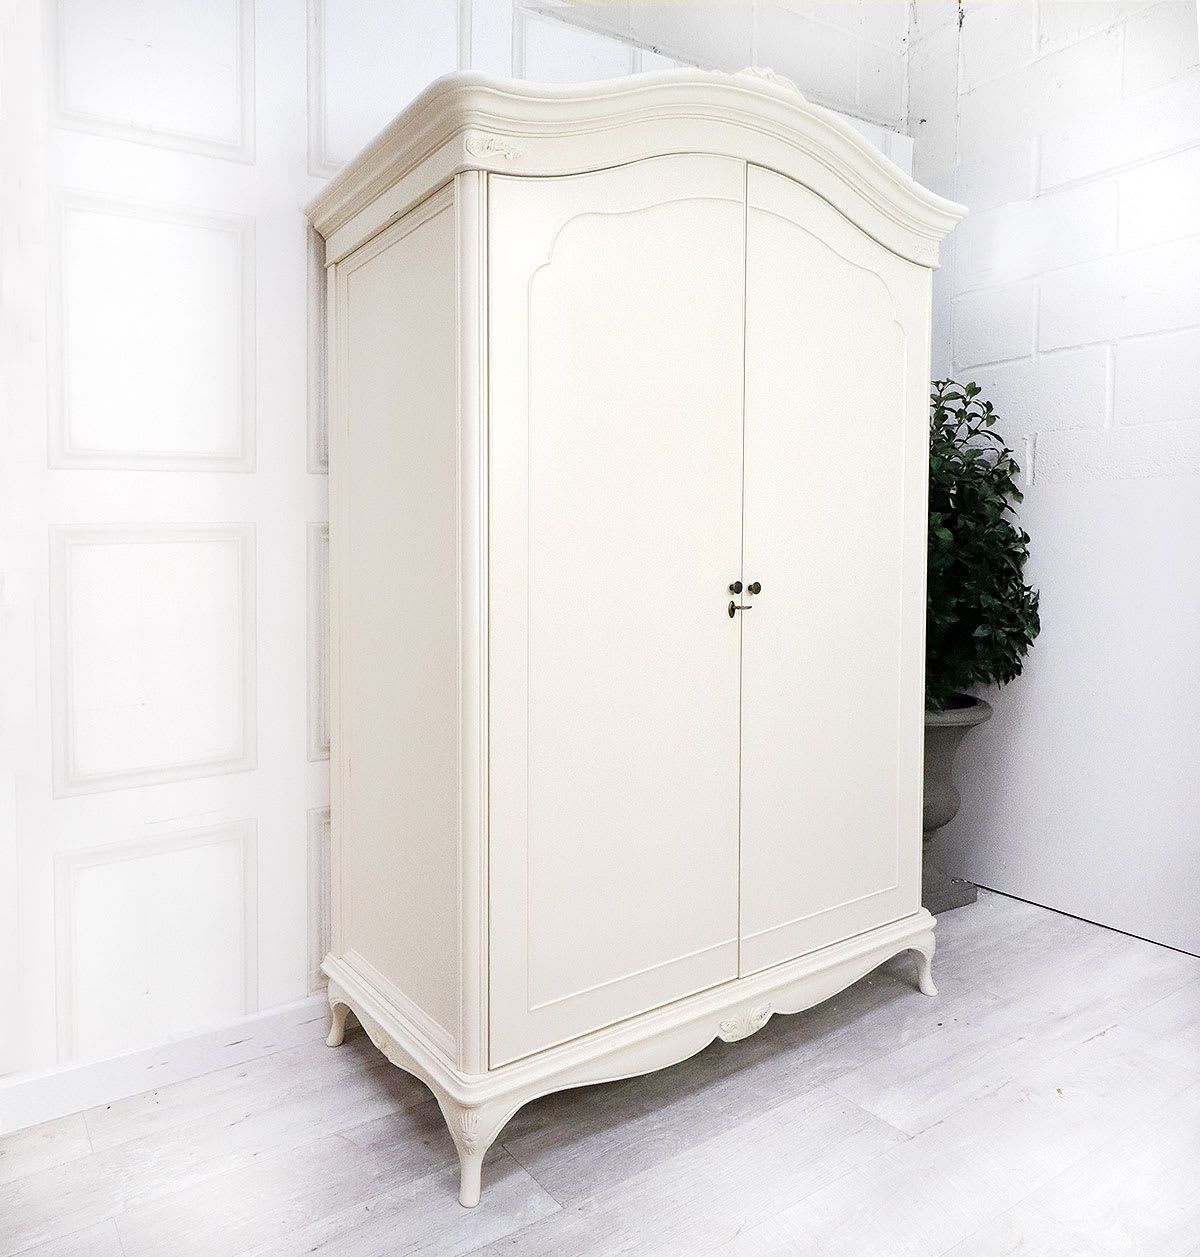 Willis & Gambier French Style Ivory Large Armoire Wardrobe | Nicky Cornell  A Uk Stockist Throughout French White Wardrobes (Gallery 4 of 20)